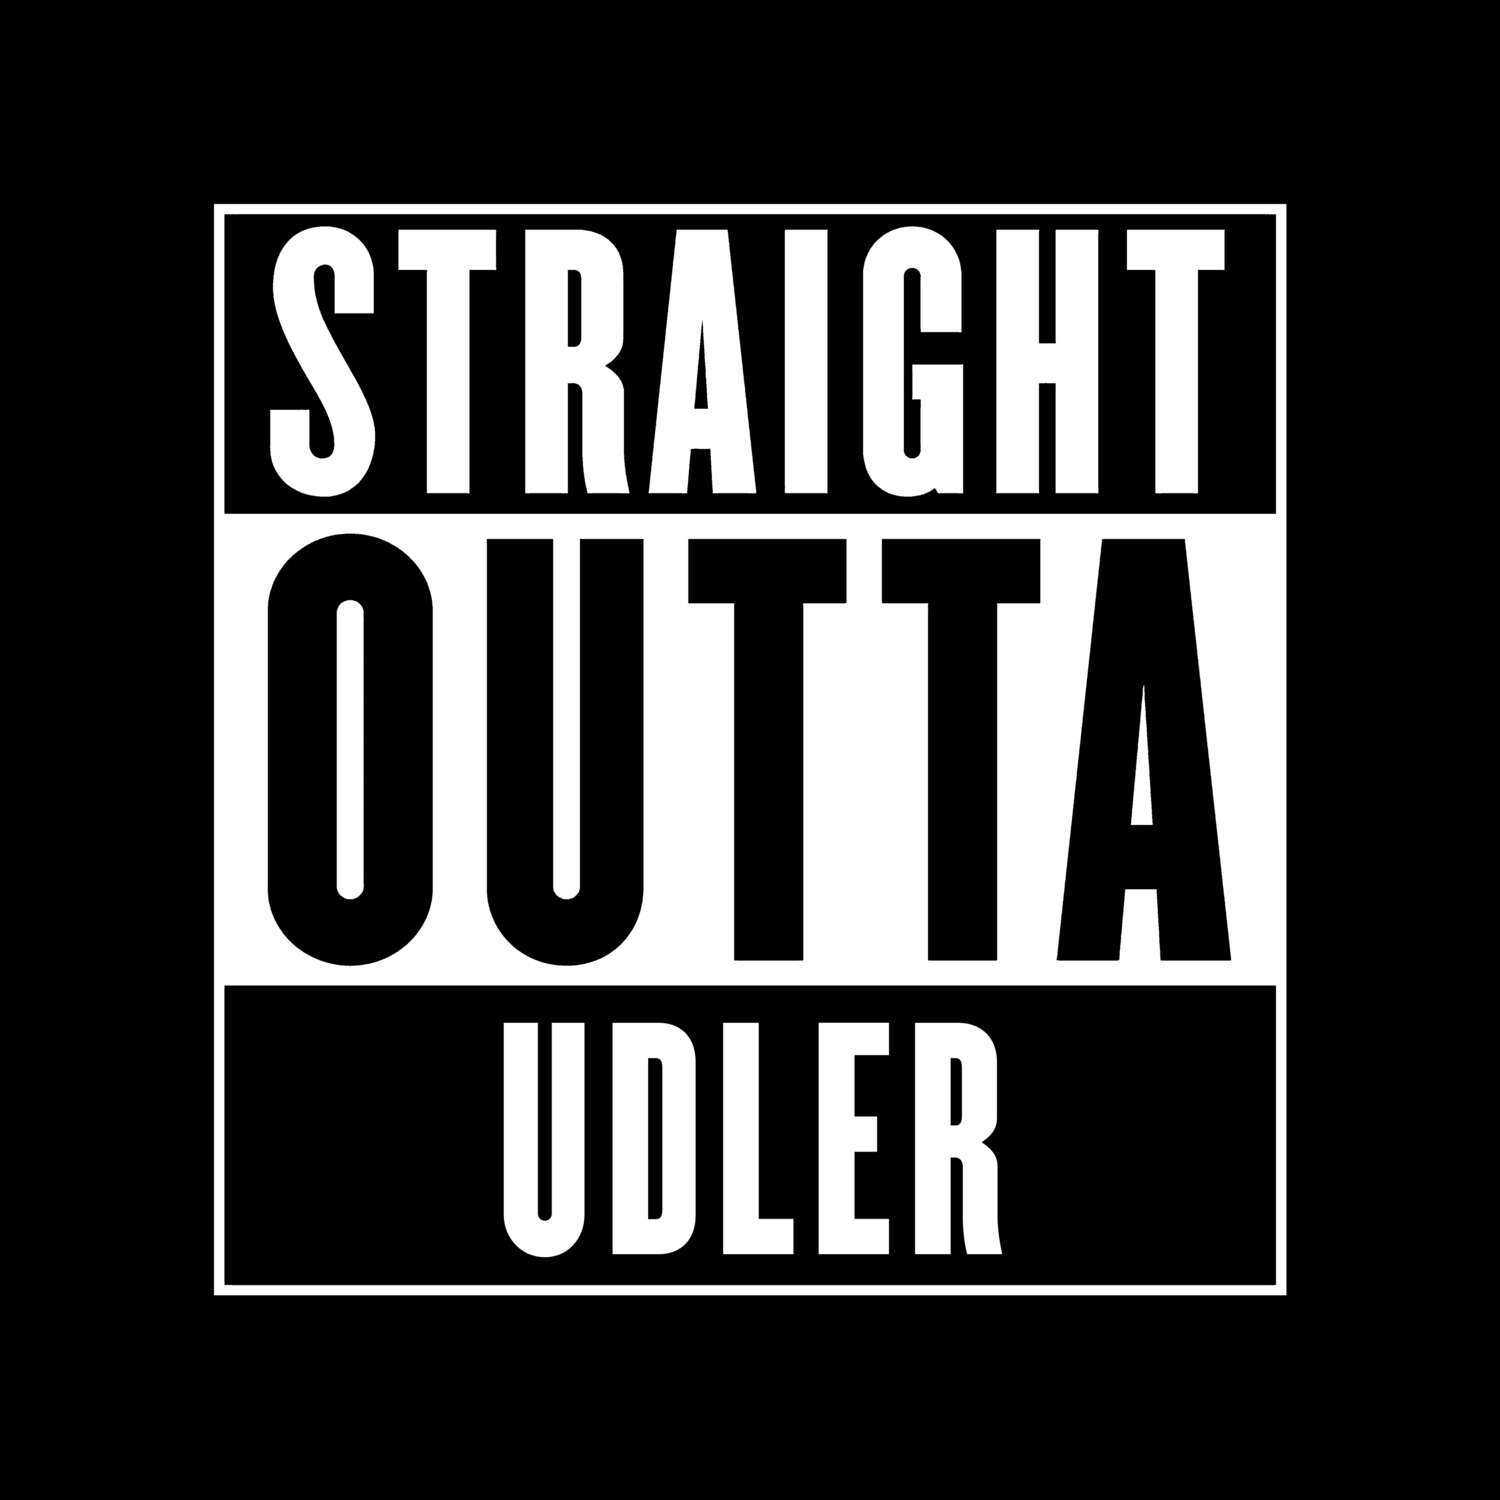 Udler T-Shirt »Straight Outta«